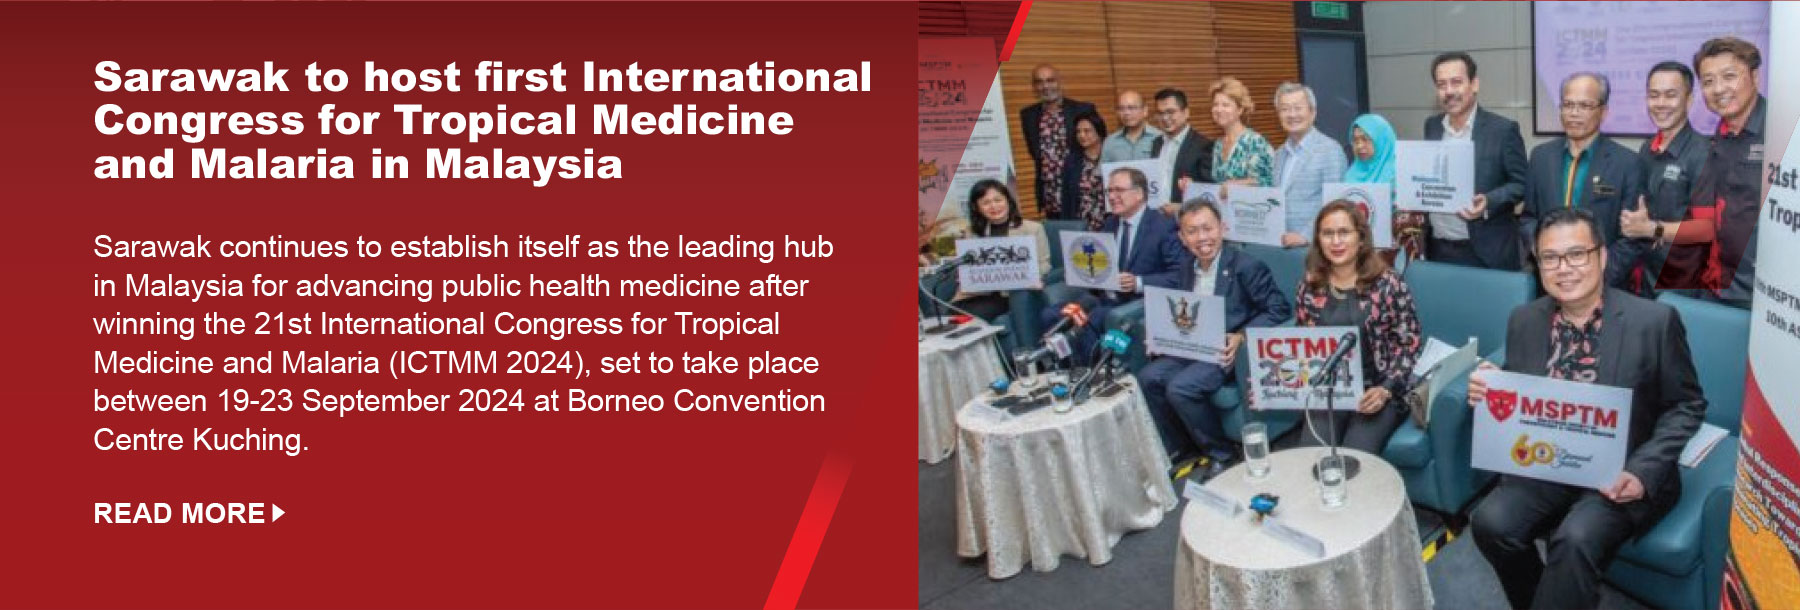 Sarawak to host first International Congress for Tropical Medicine and Malaria in Malaysia